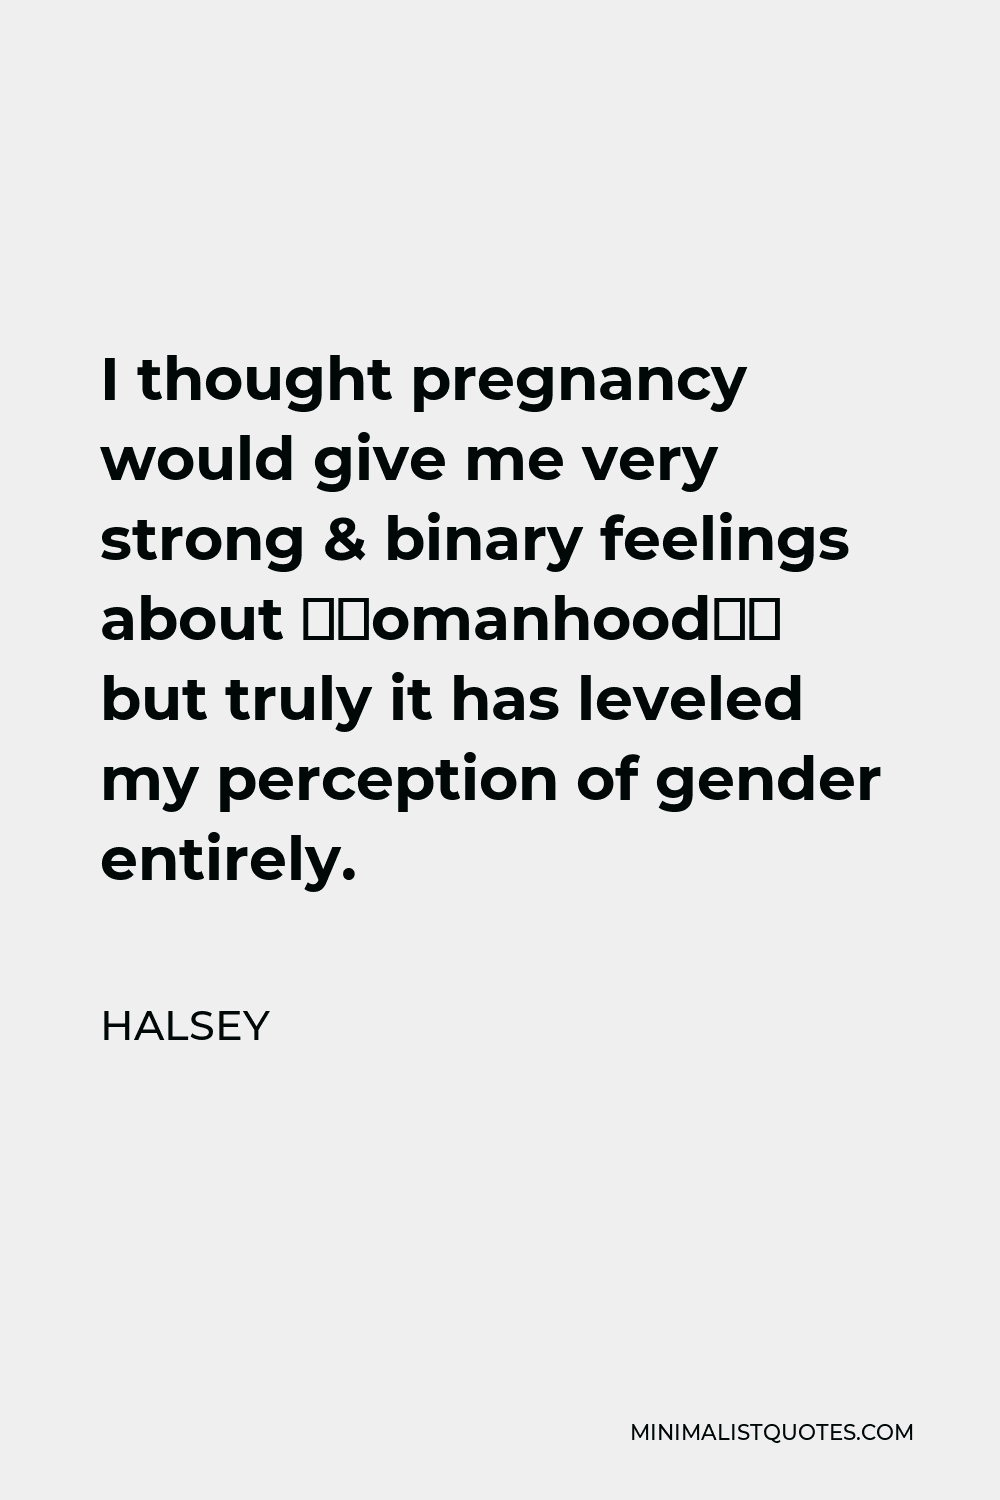 Halsey Quote - I thought pregnancy would give me very strong & binary feelings about “womanhood” but truly it has leveled my perception of gender entirely.